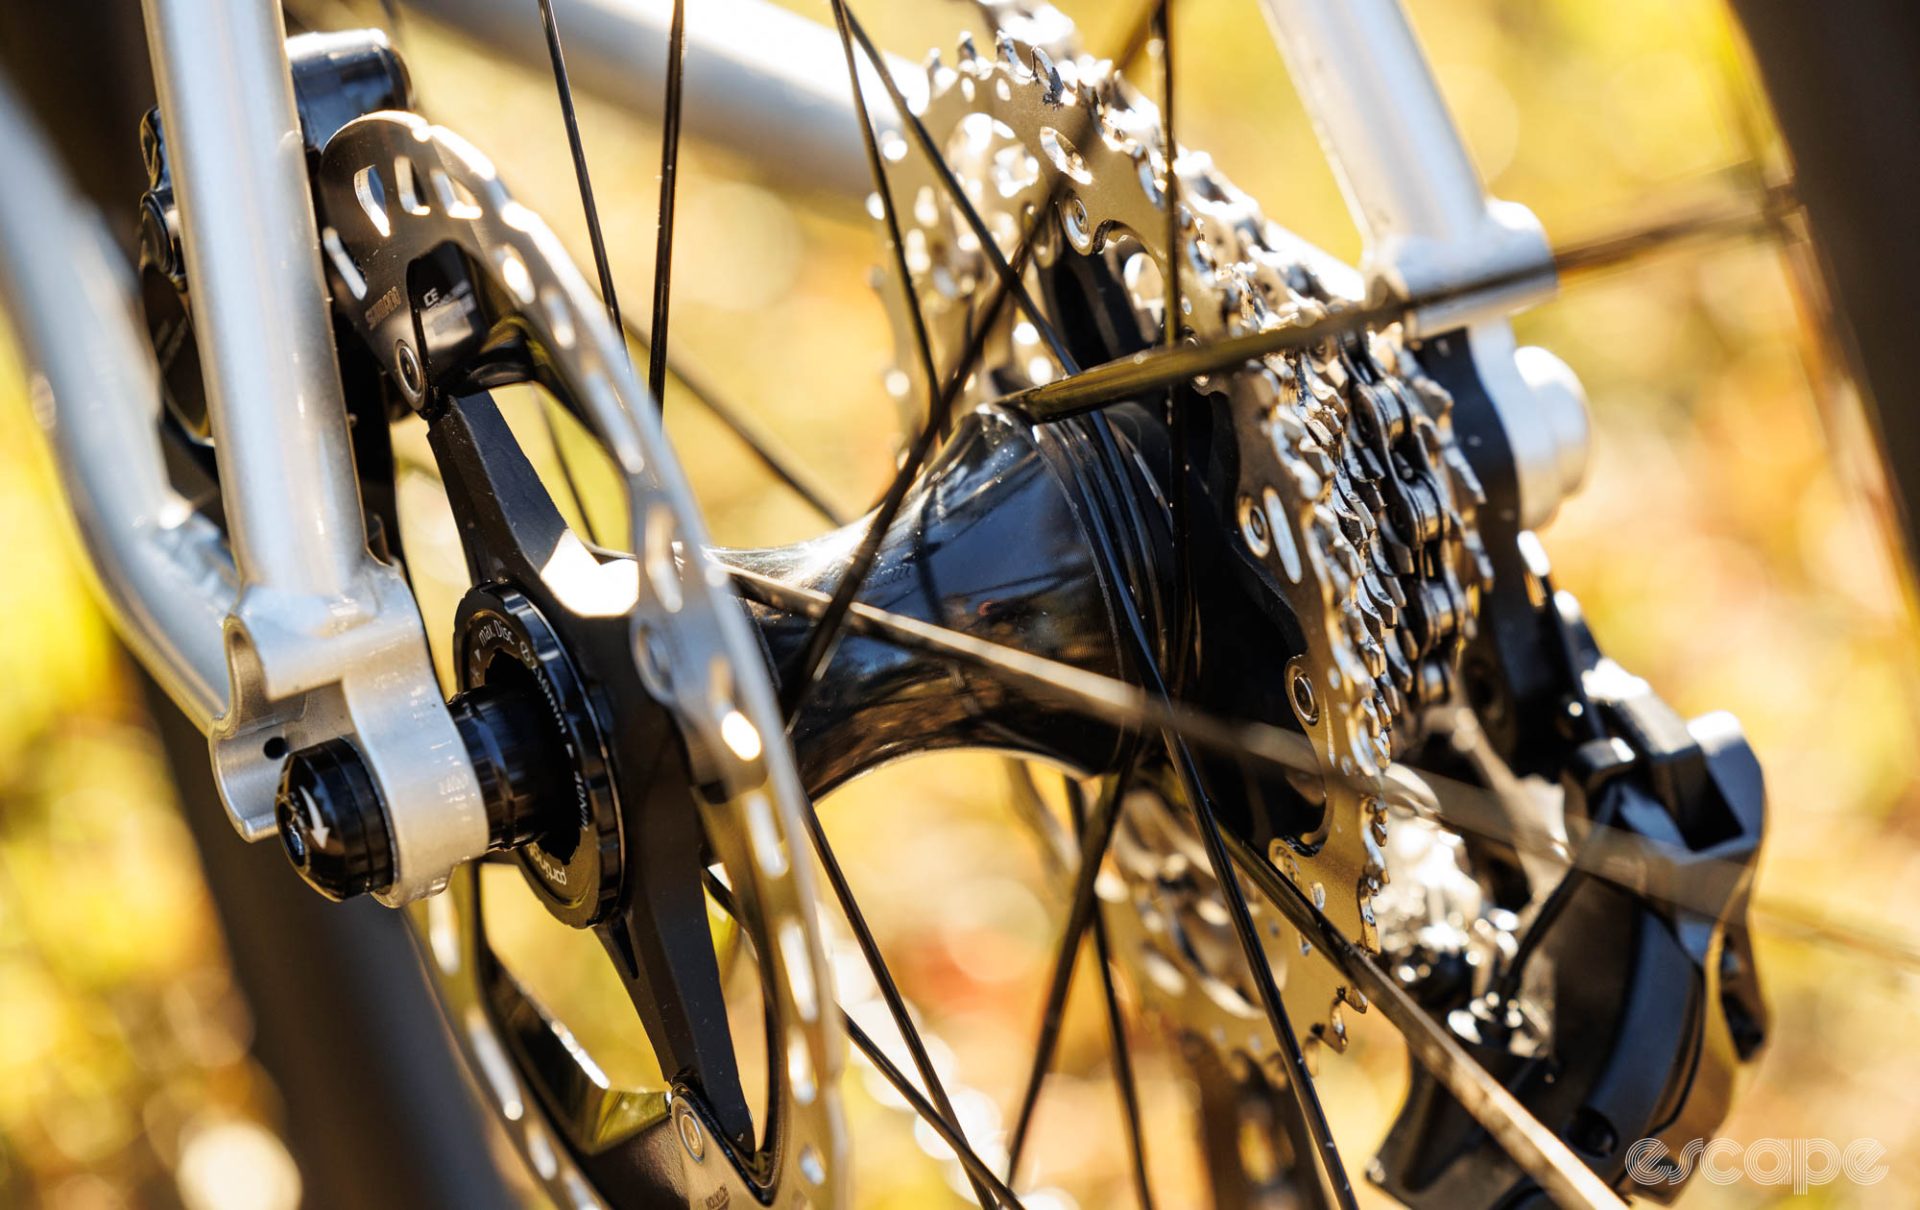 A closeup of the rear hub, showing how the drive side spokes offer ample clearance to the derailleur cage.